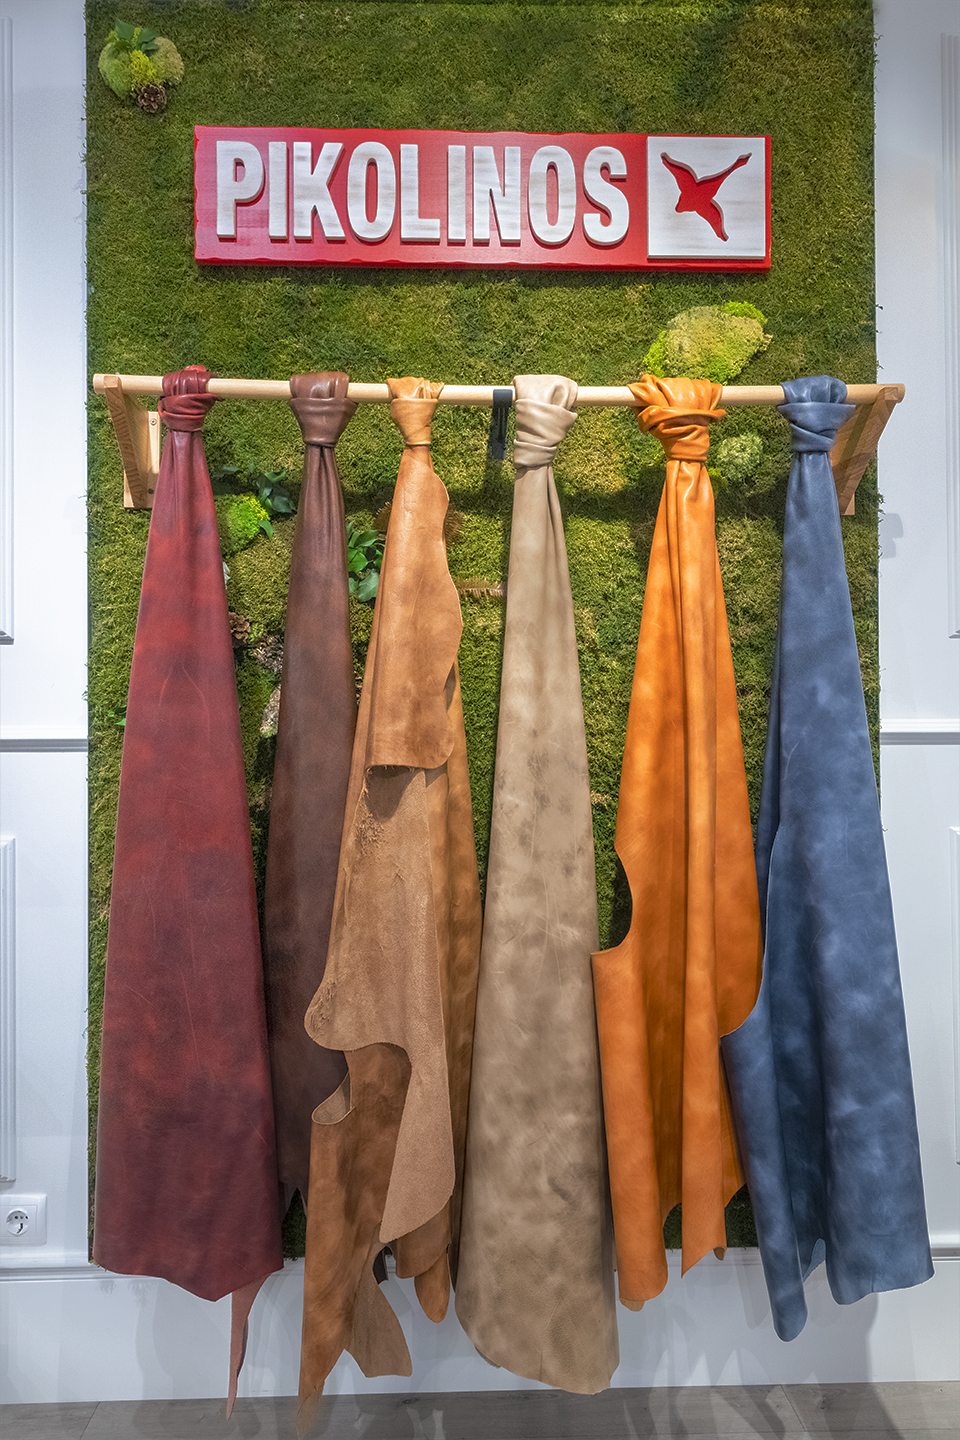 Image of skins hanging over a vertical garden in the Pikolinos store.